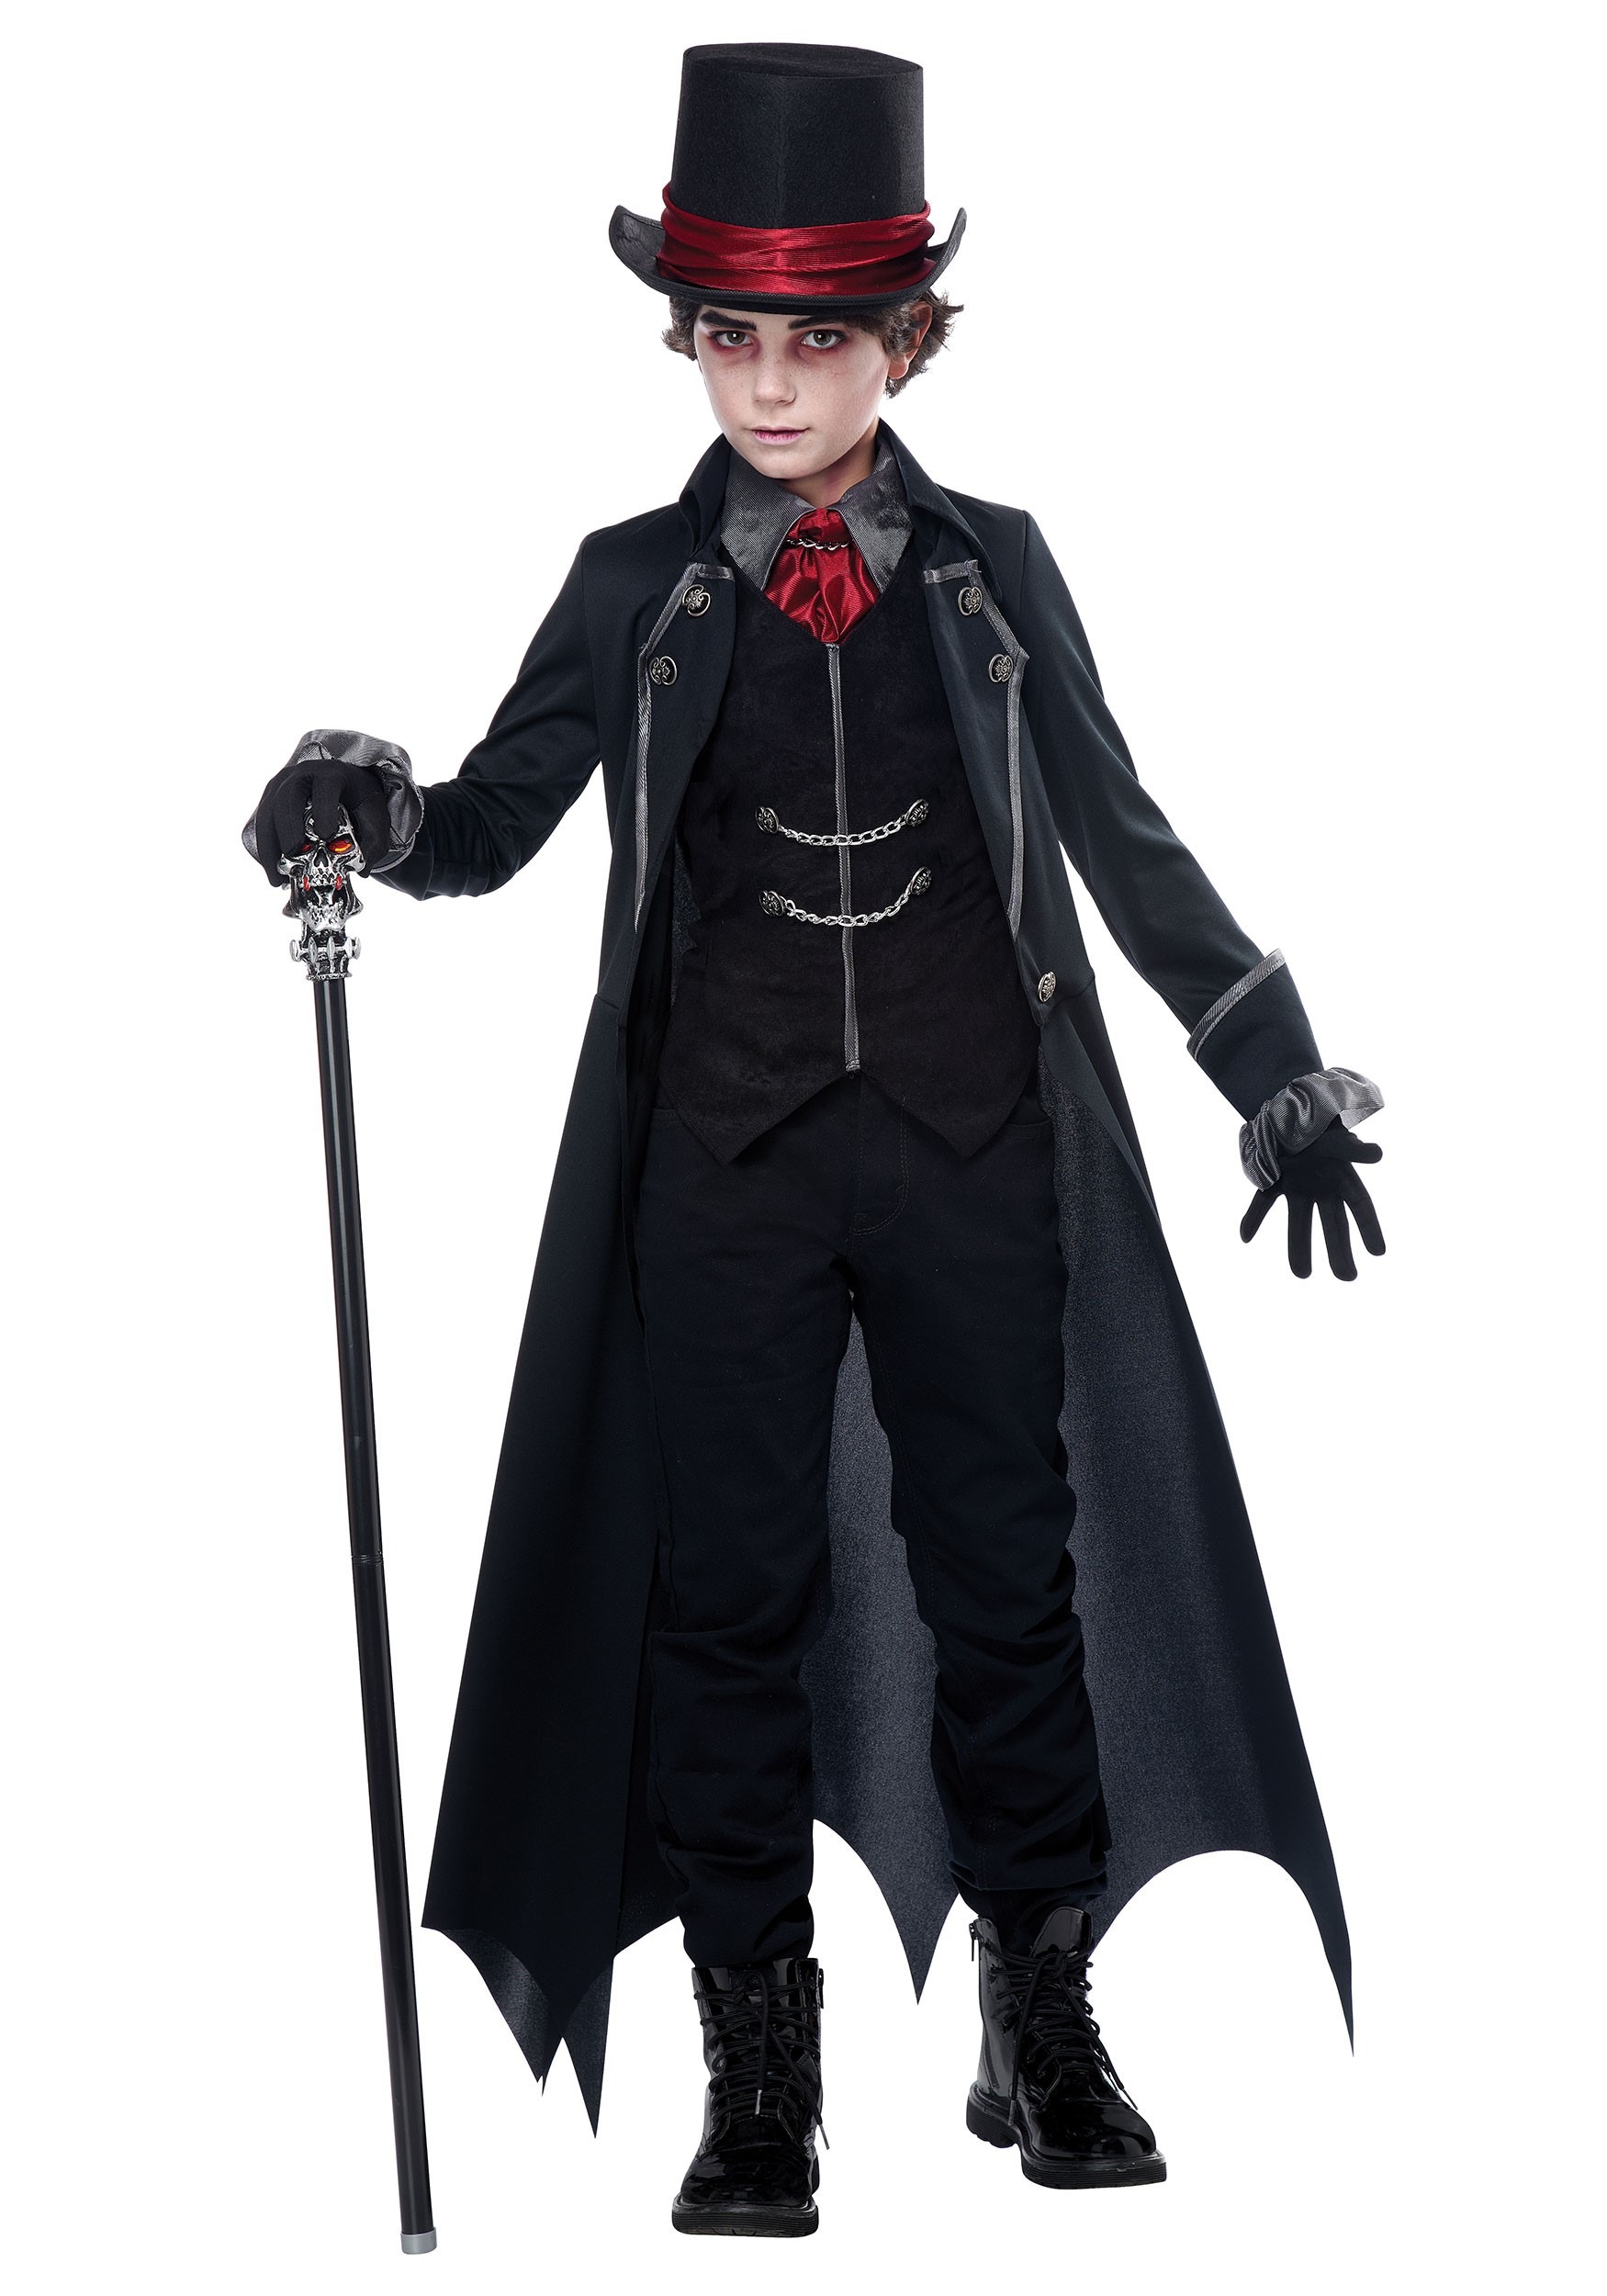 Photos - Fancy Dress California Costume Collection Gothic Vampire Costume for Boys Black/Re 